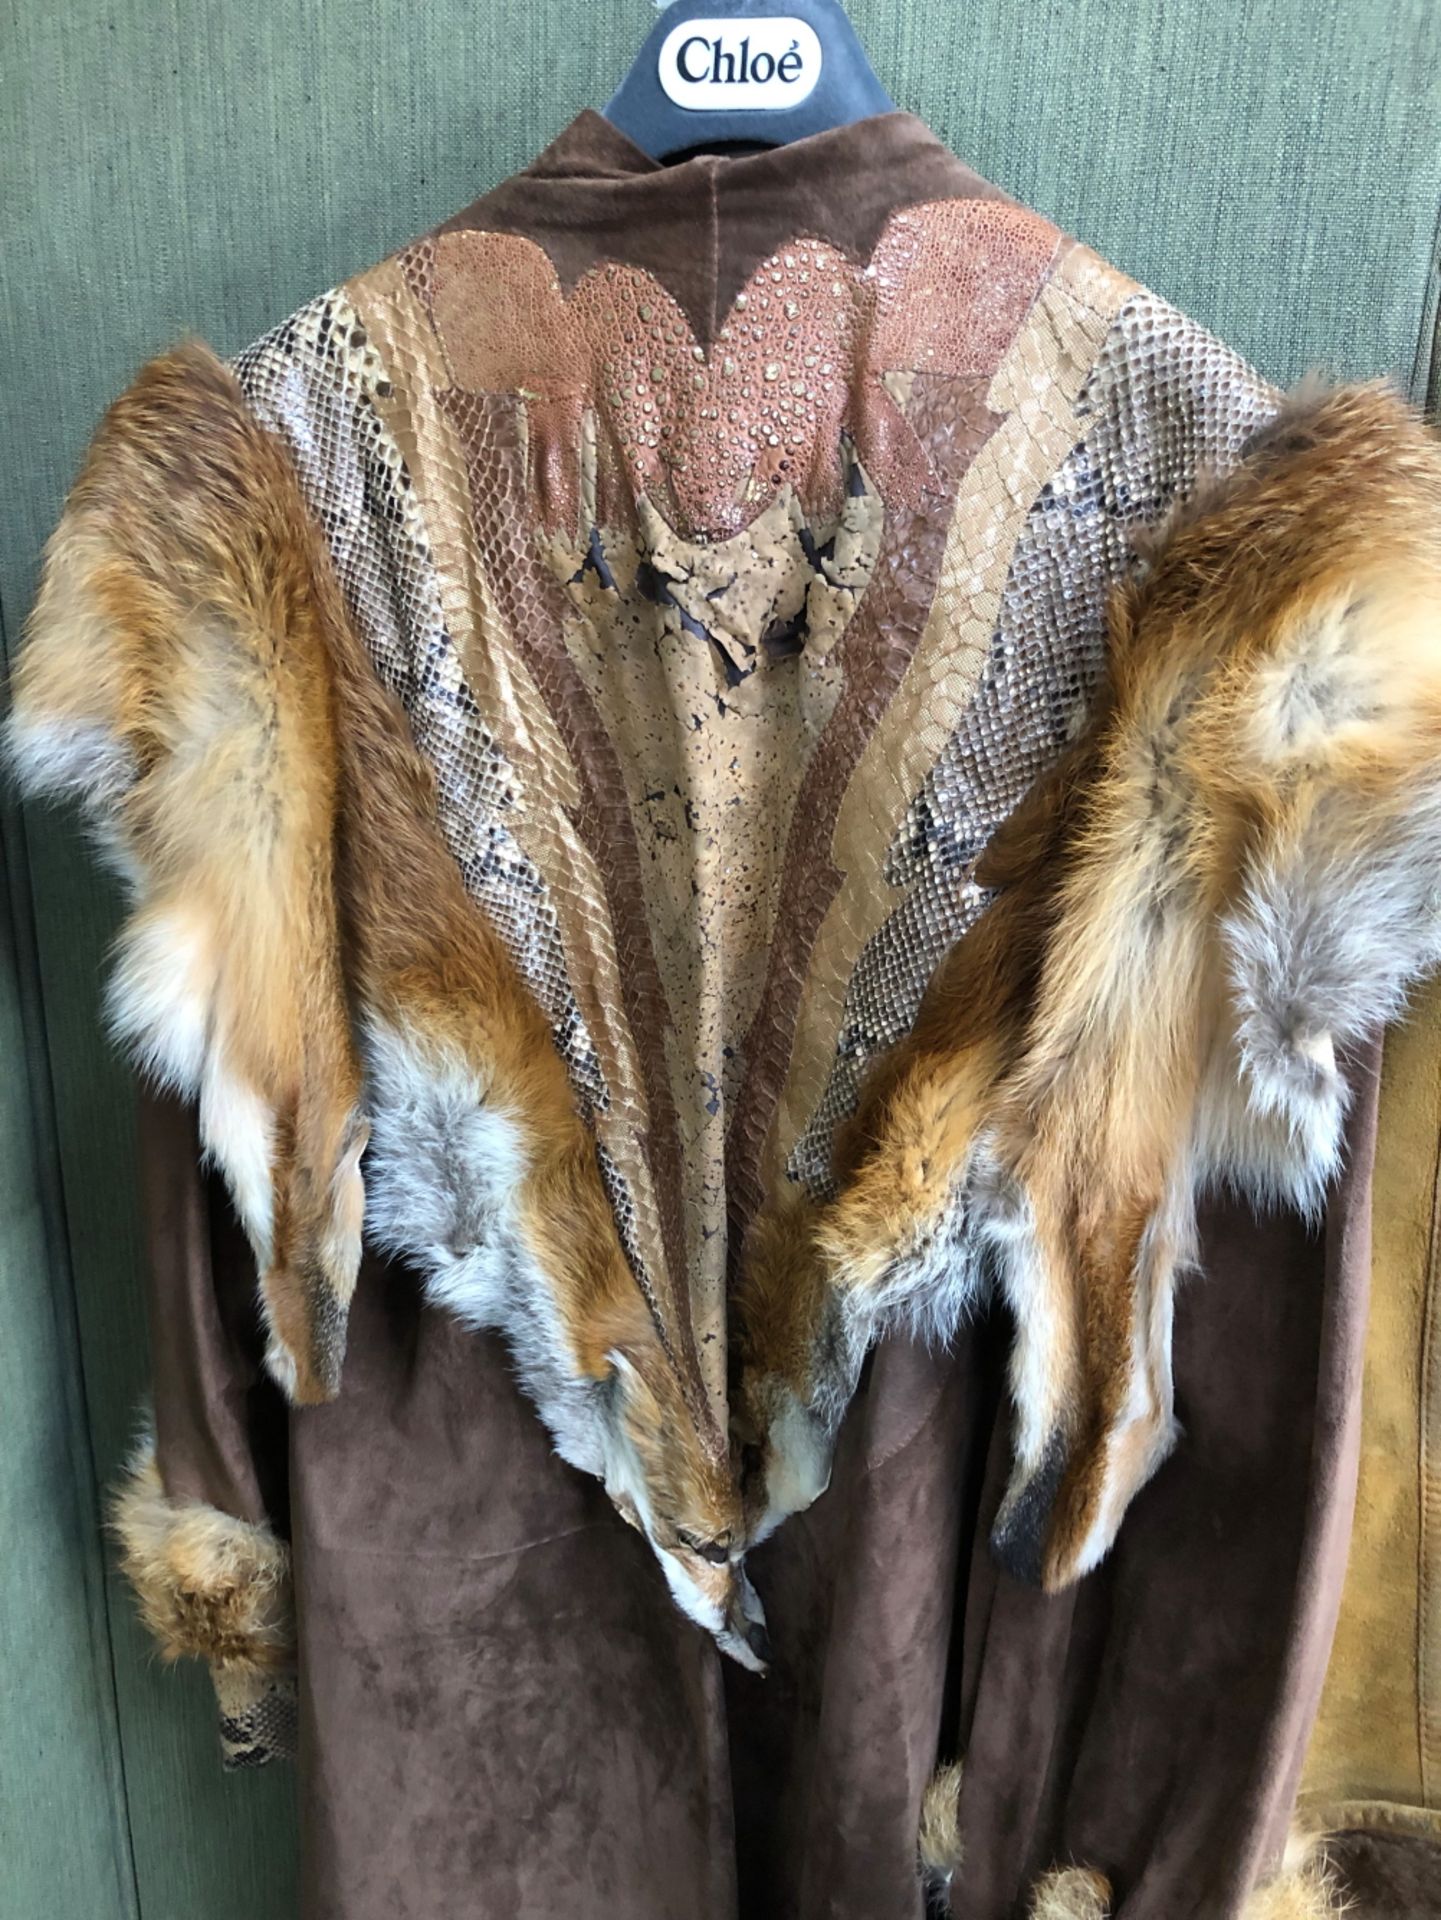 JACKETS: STRIWA 3/4 LENGTH FAWN COLOURED SHEEP SKIN JACKET WITH HOOD SIZE STATED EUR 36, TOGETHER - Bild 13 aus 21